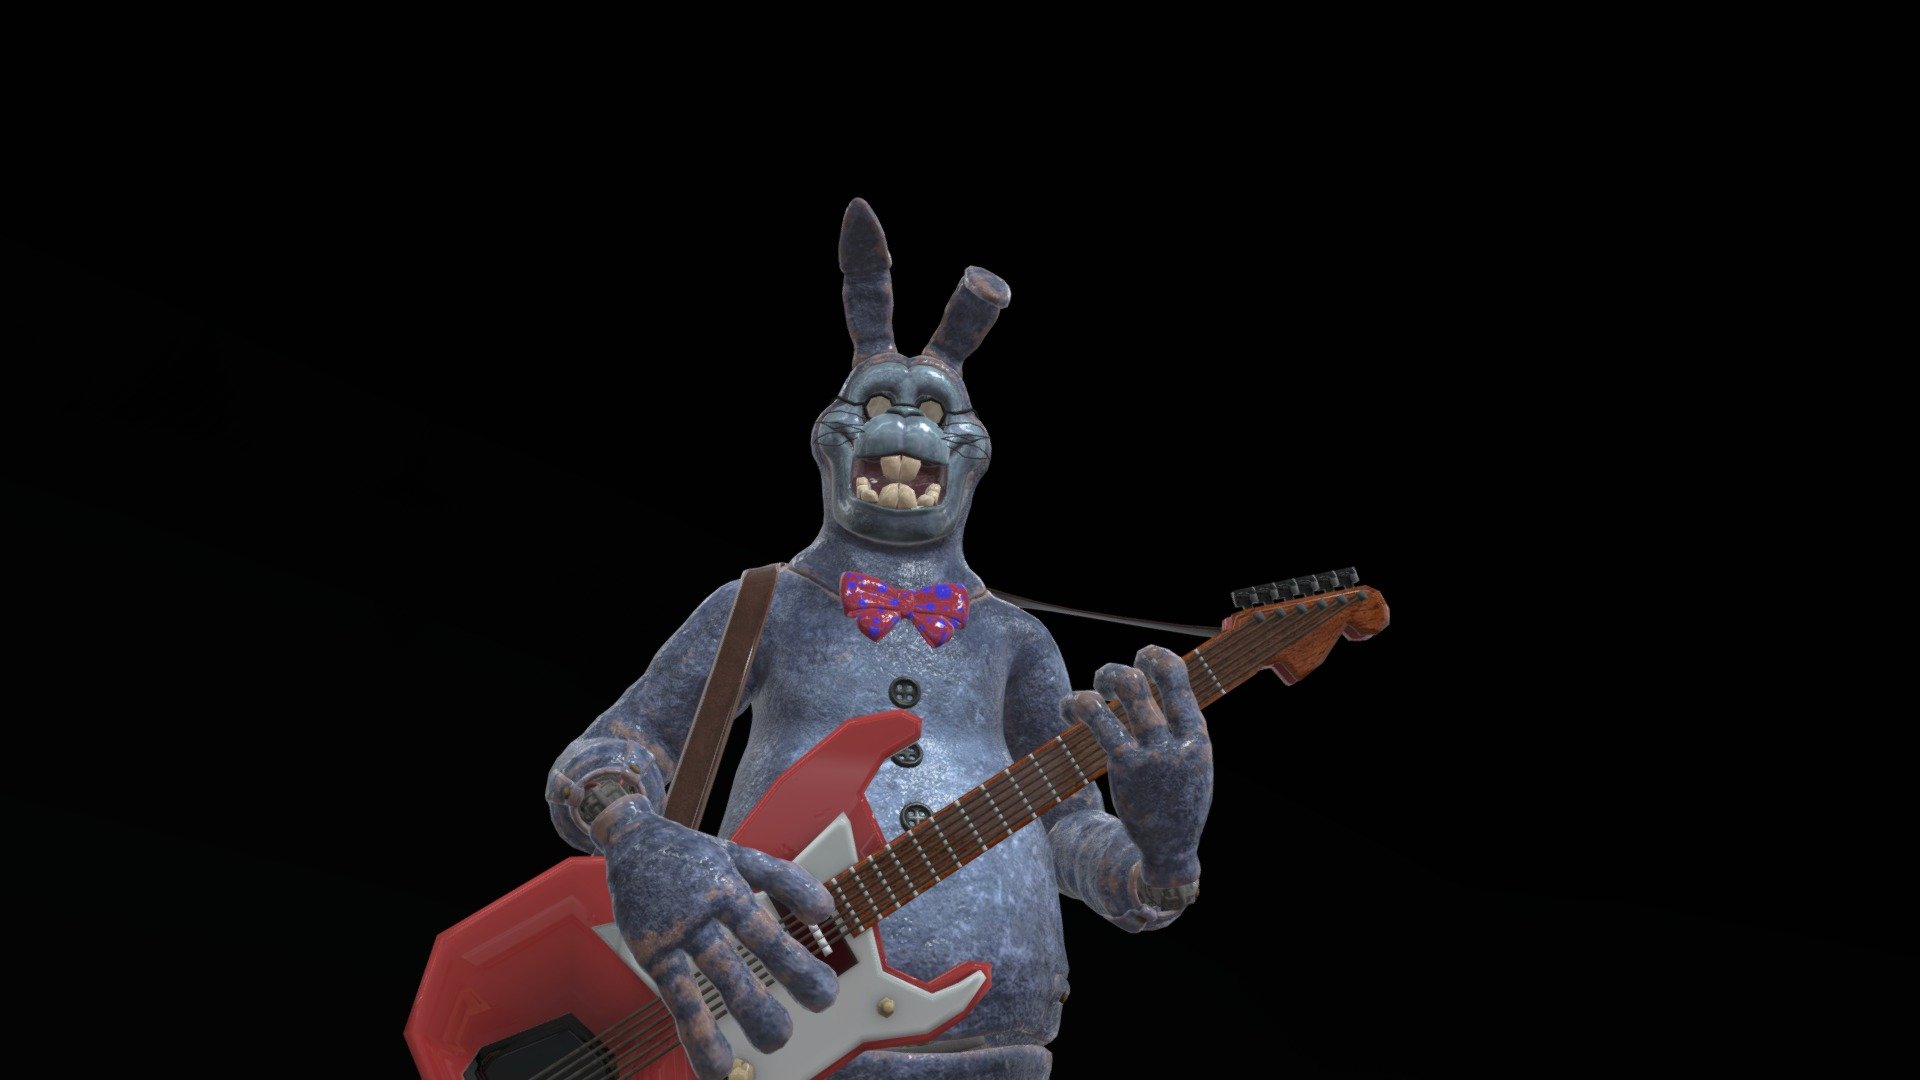 bonnie-jr-download-free-3d-model-by-greenbeengamer-greenbeengamer64